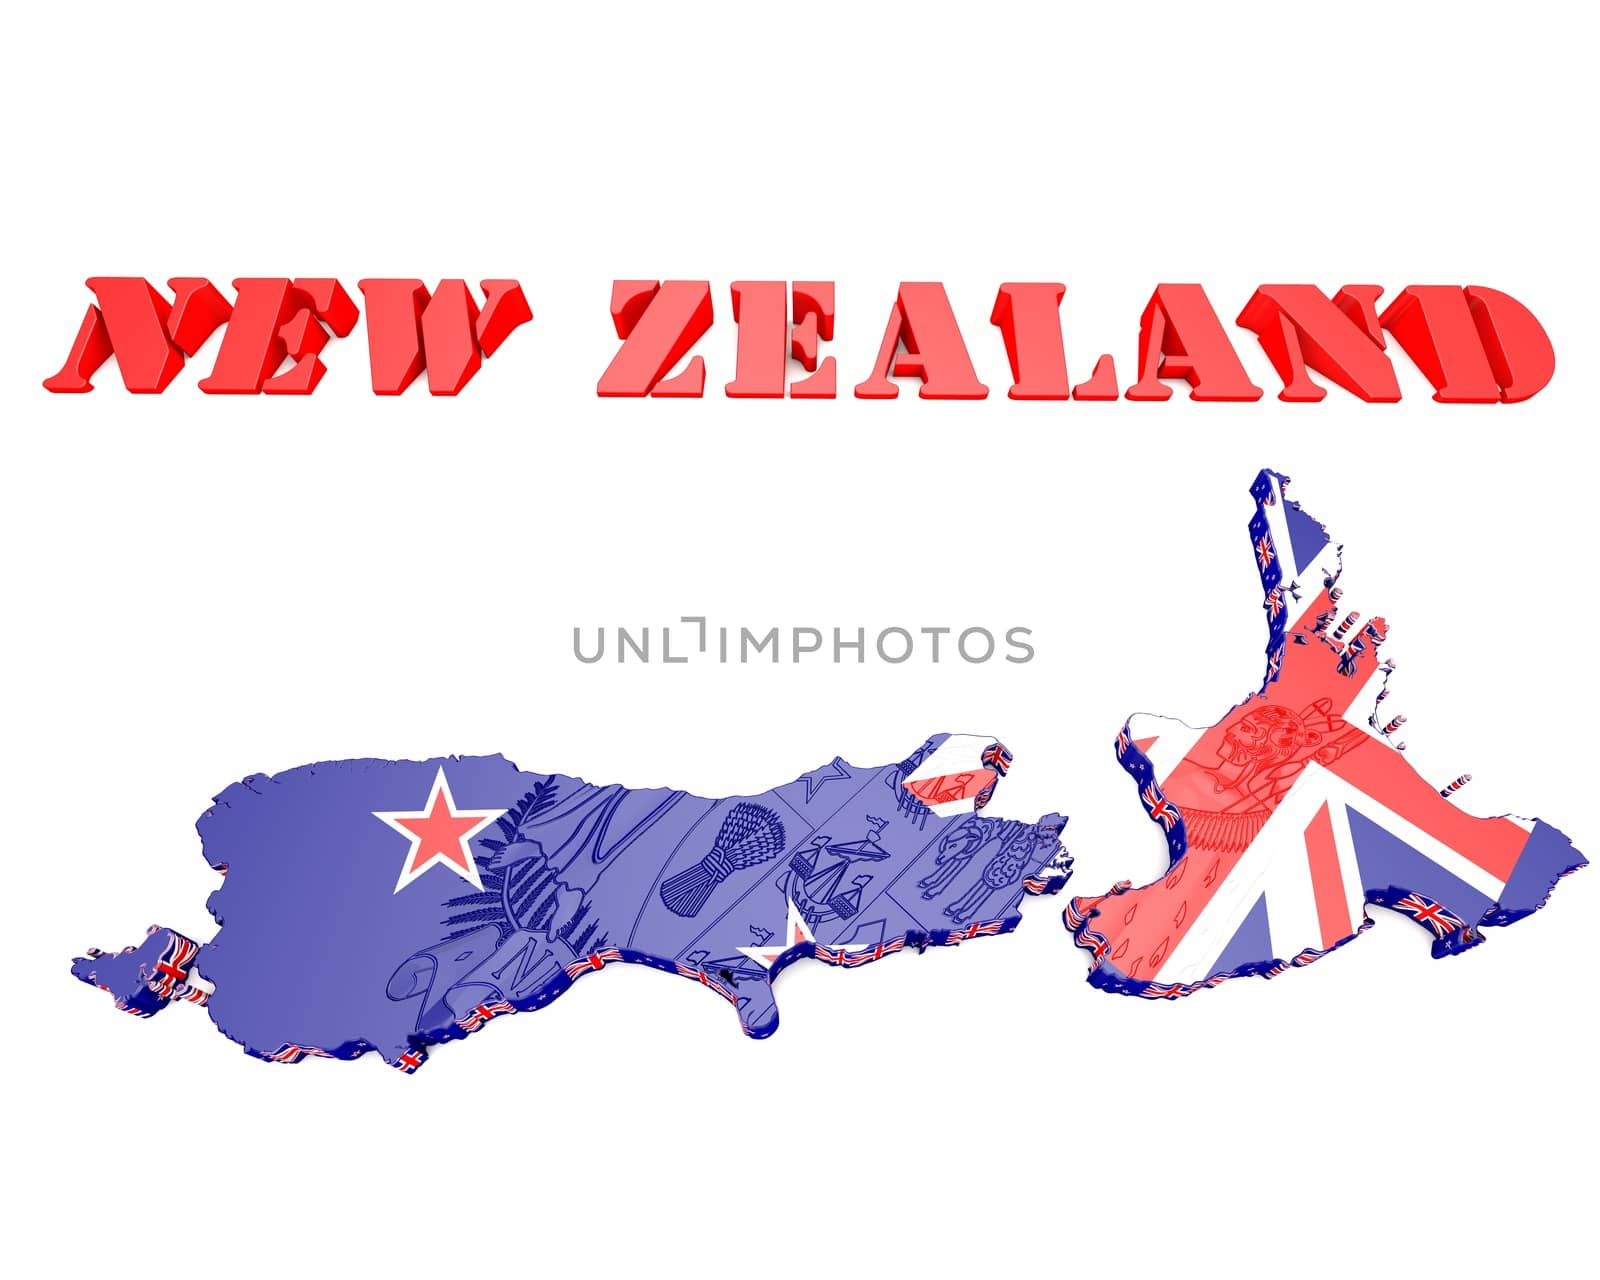 3D map illustration of New Zealand with coat of arms